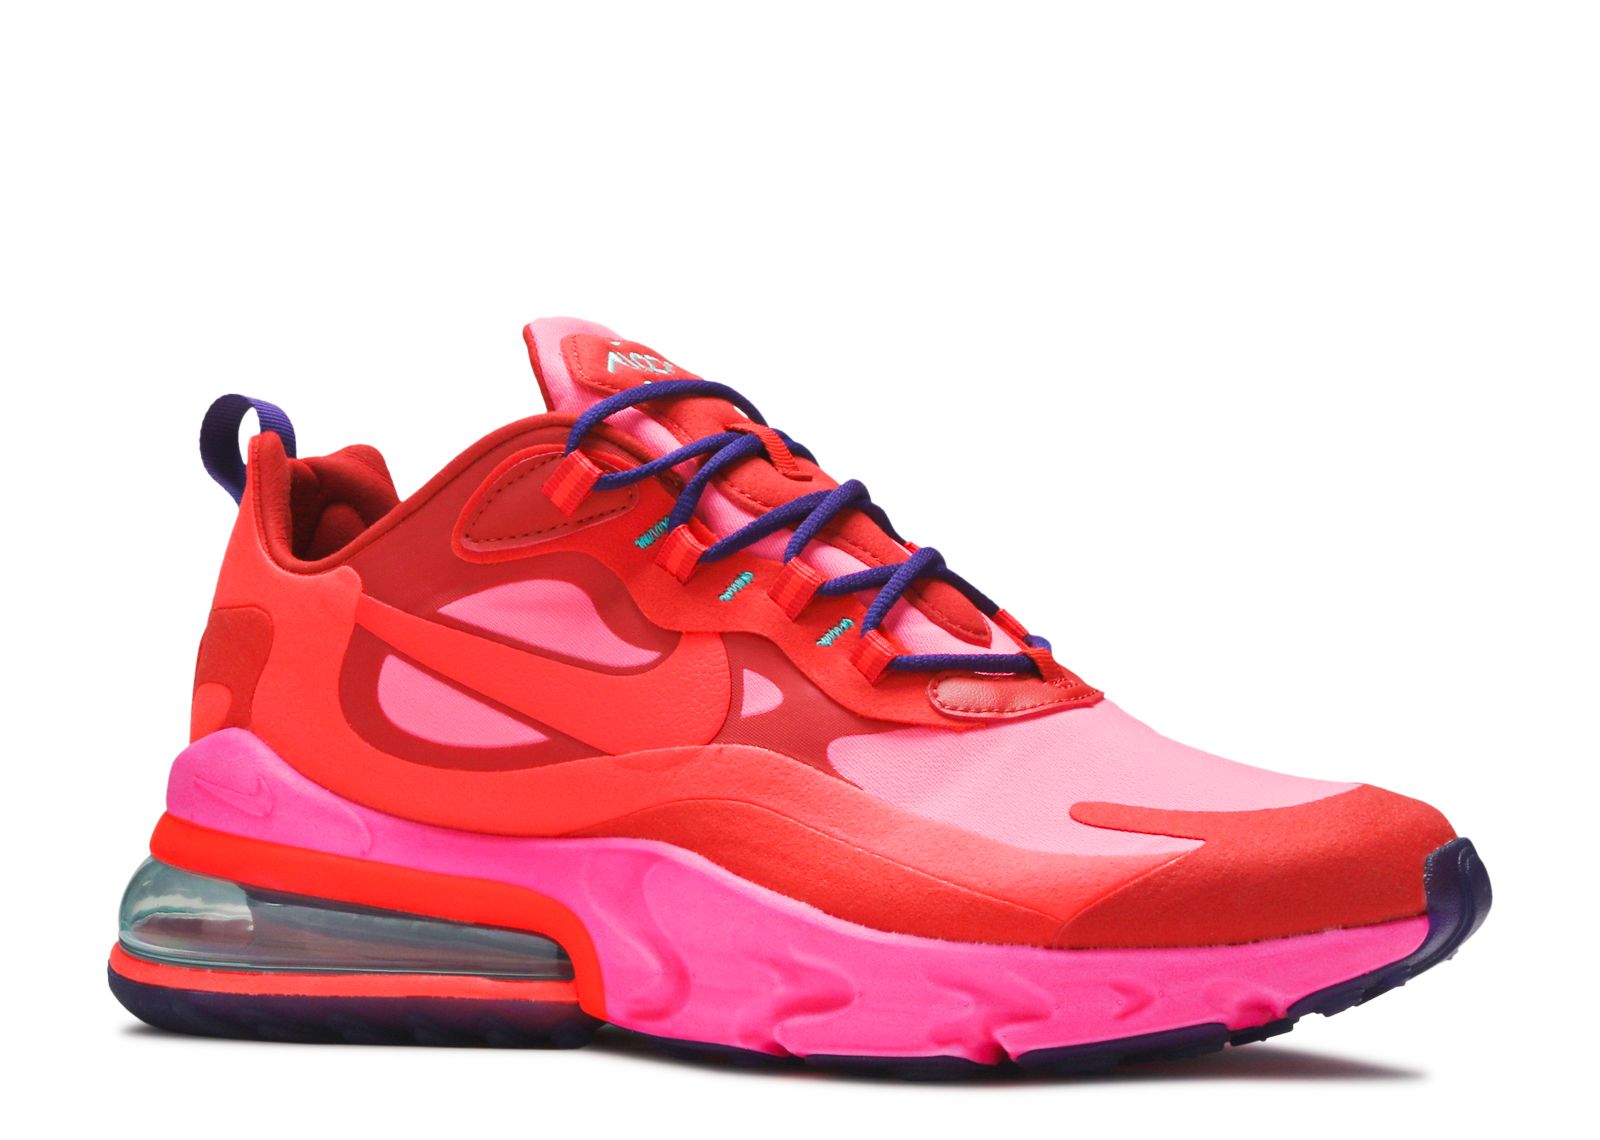 Pops of Blue and Red Appear on This Nike Air Max 270 React •